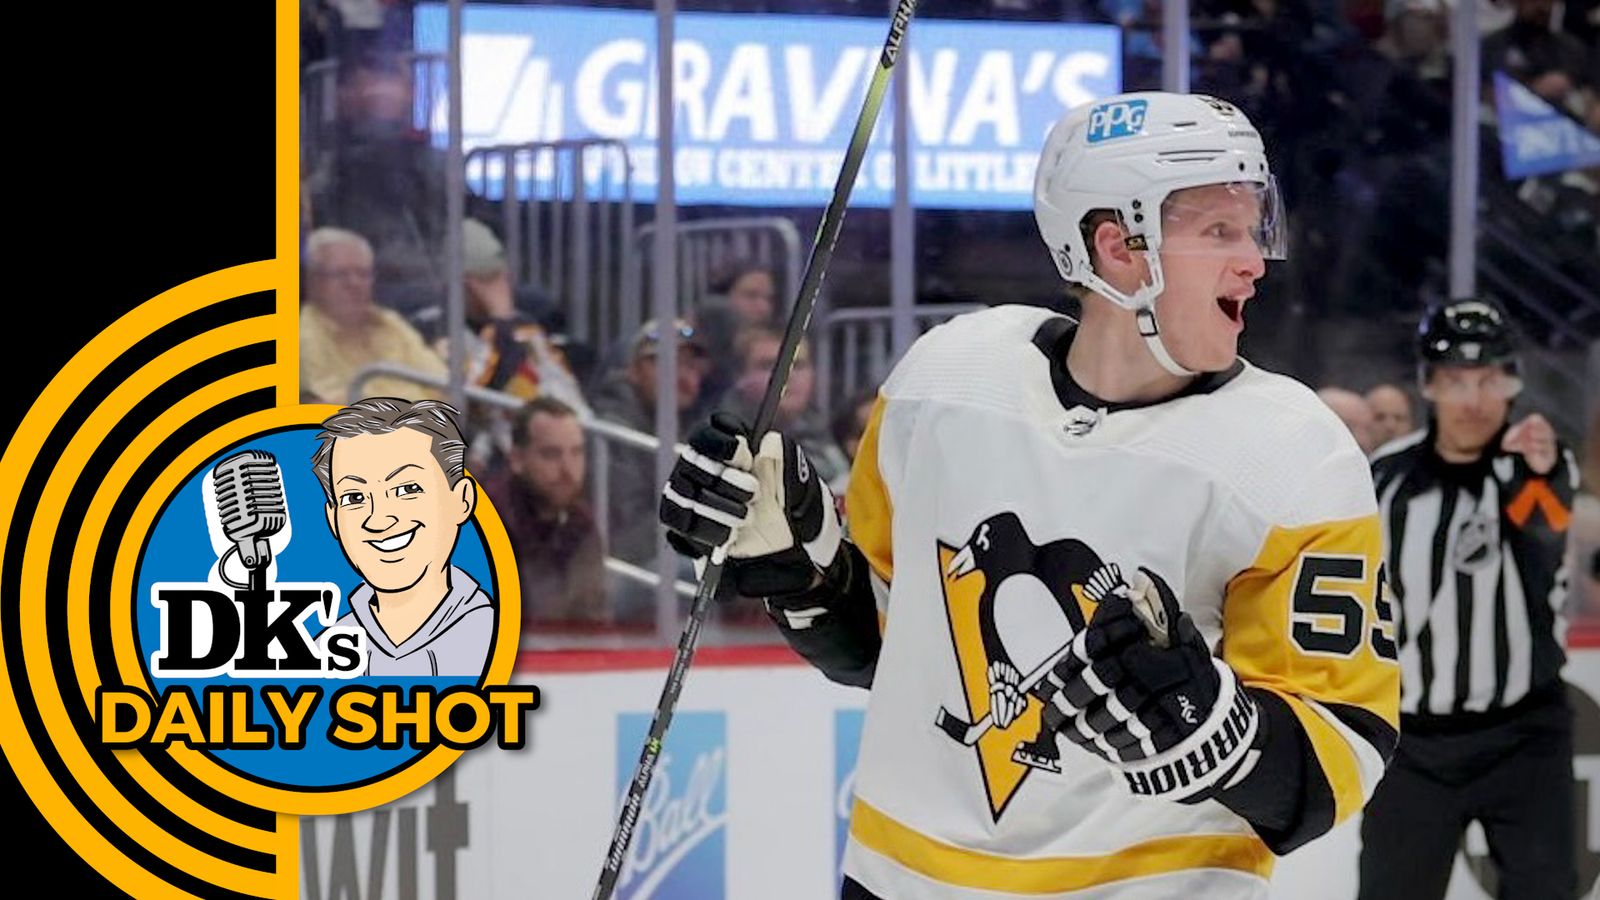 DKs Daily Shot of Penguins Pay up for Jake?